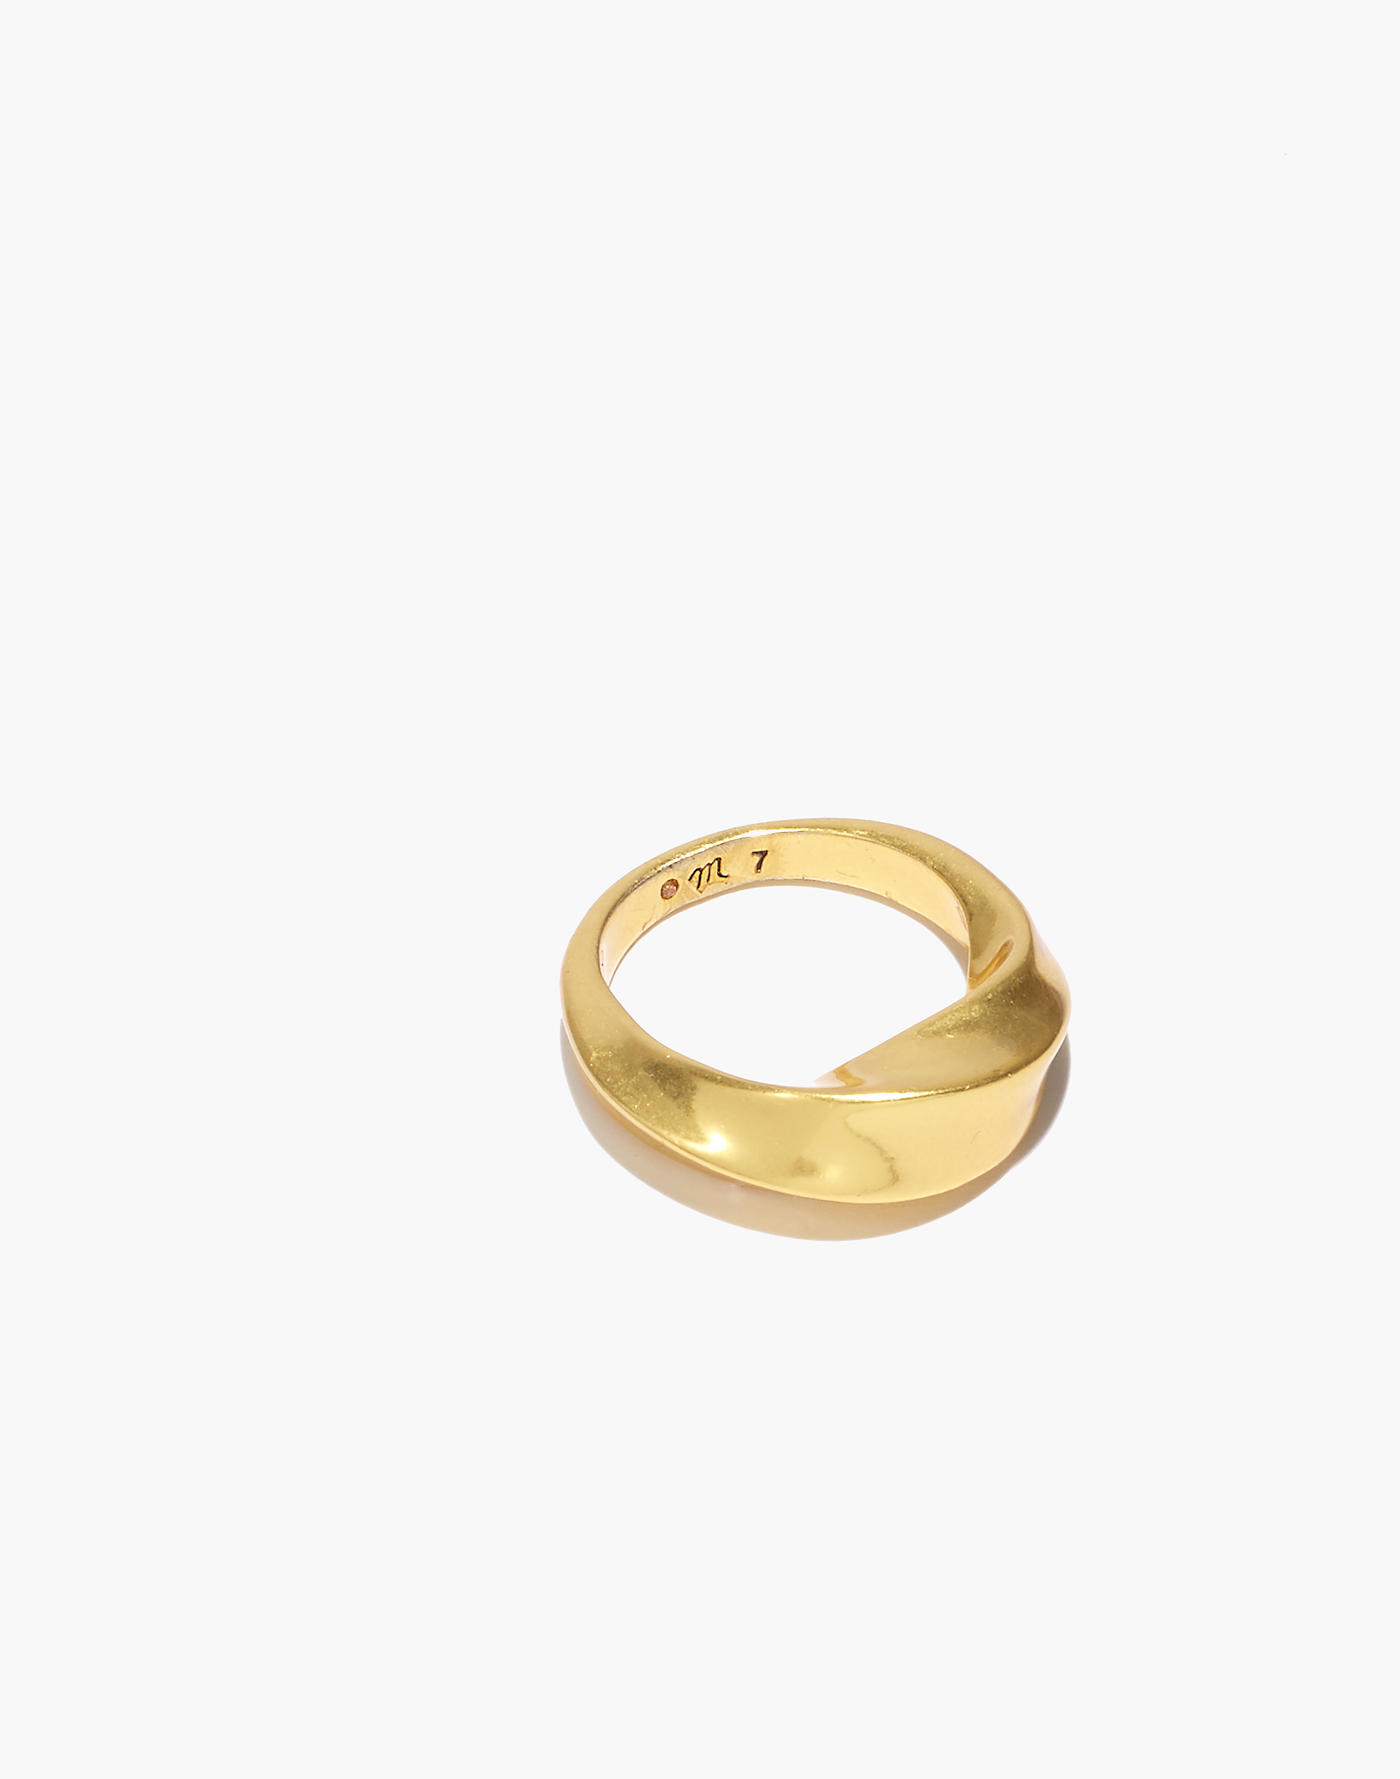 Madewell sale ring